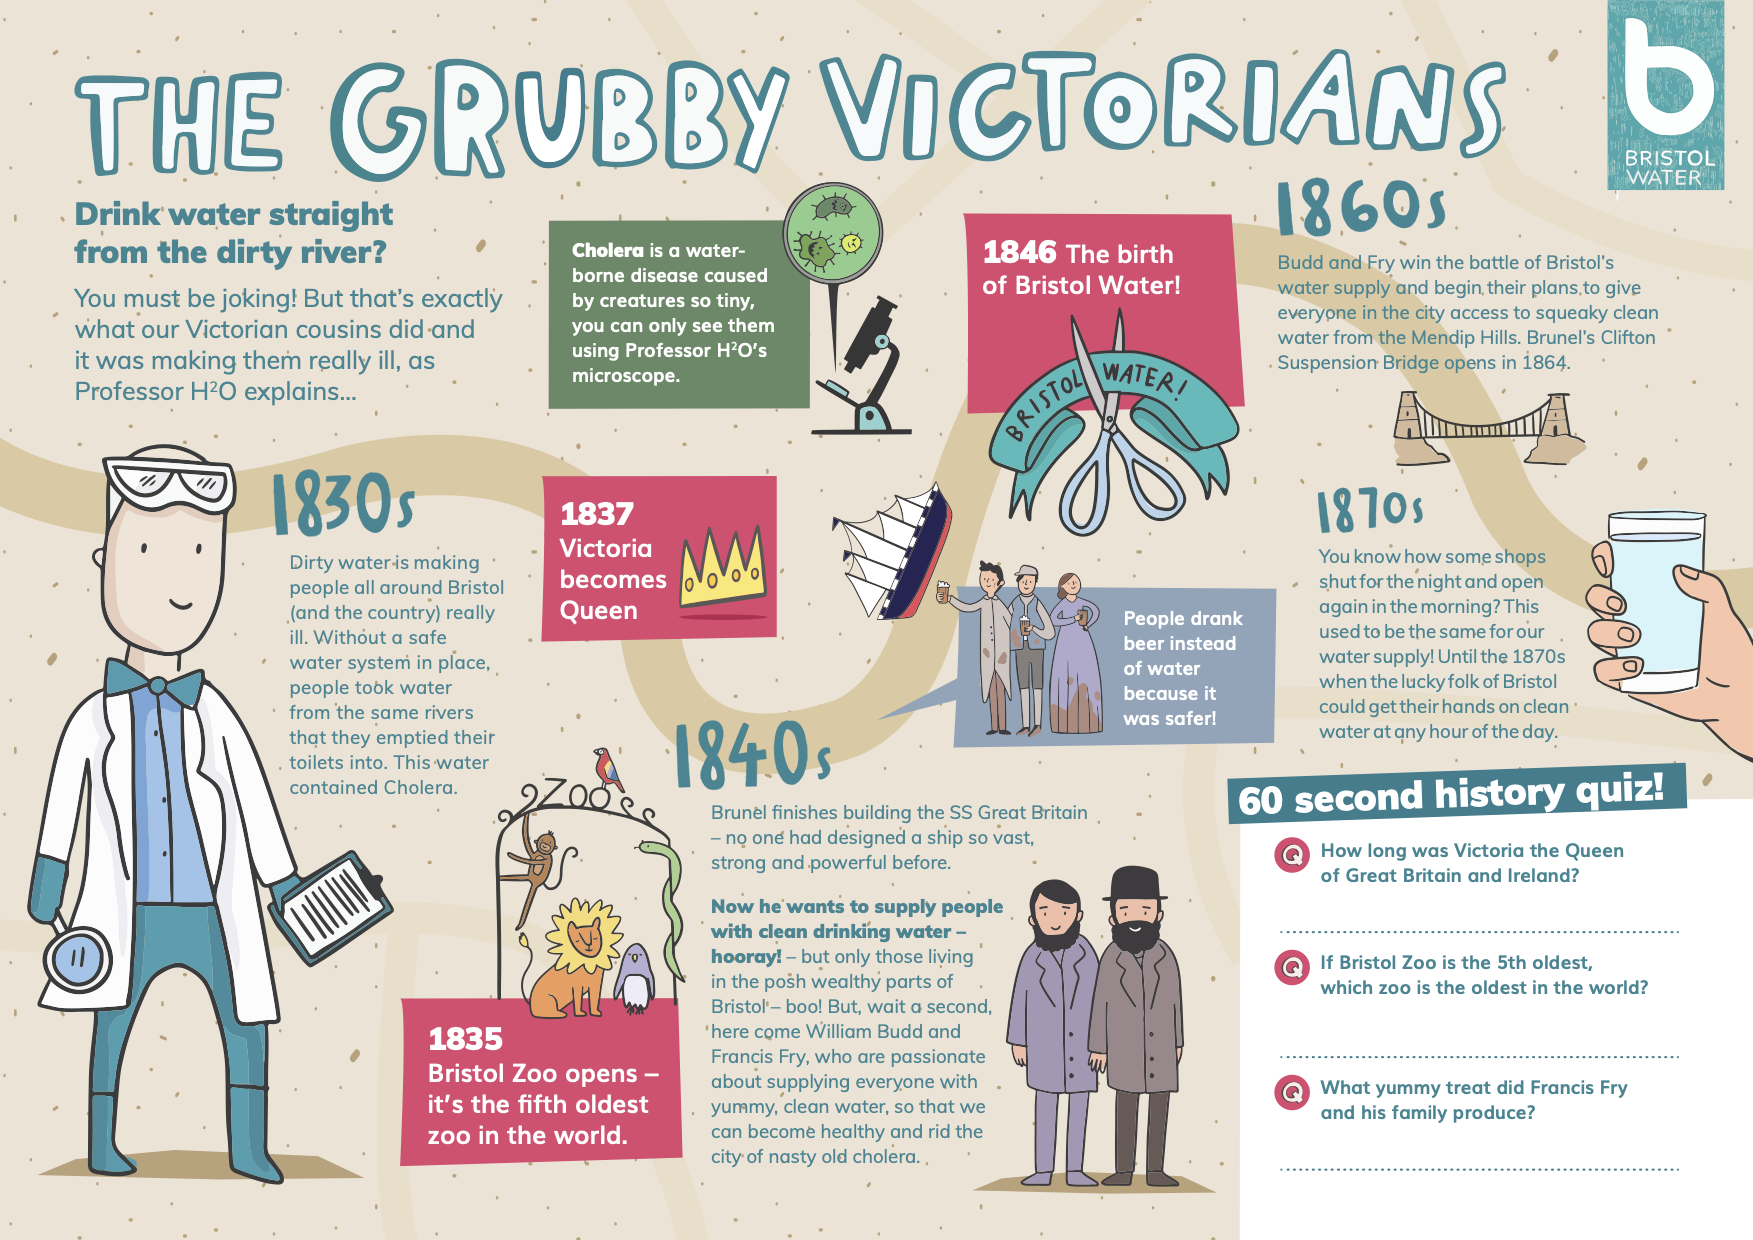 Time Travel: grubby victorians